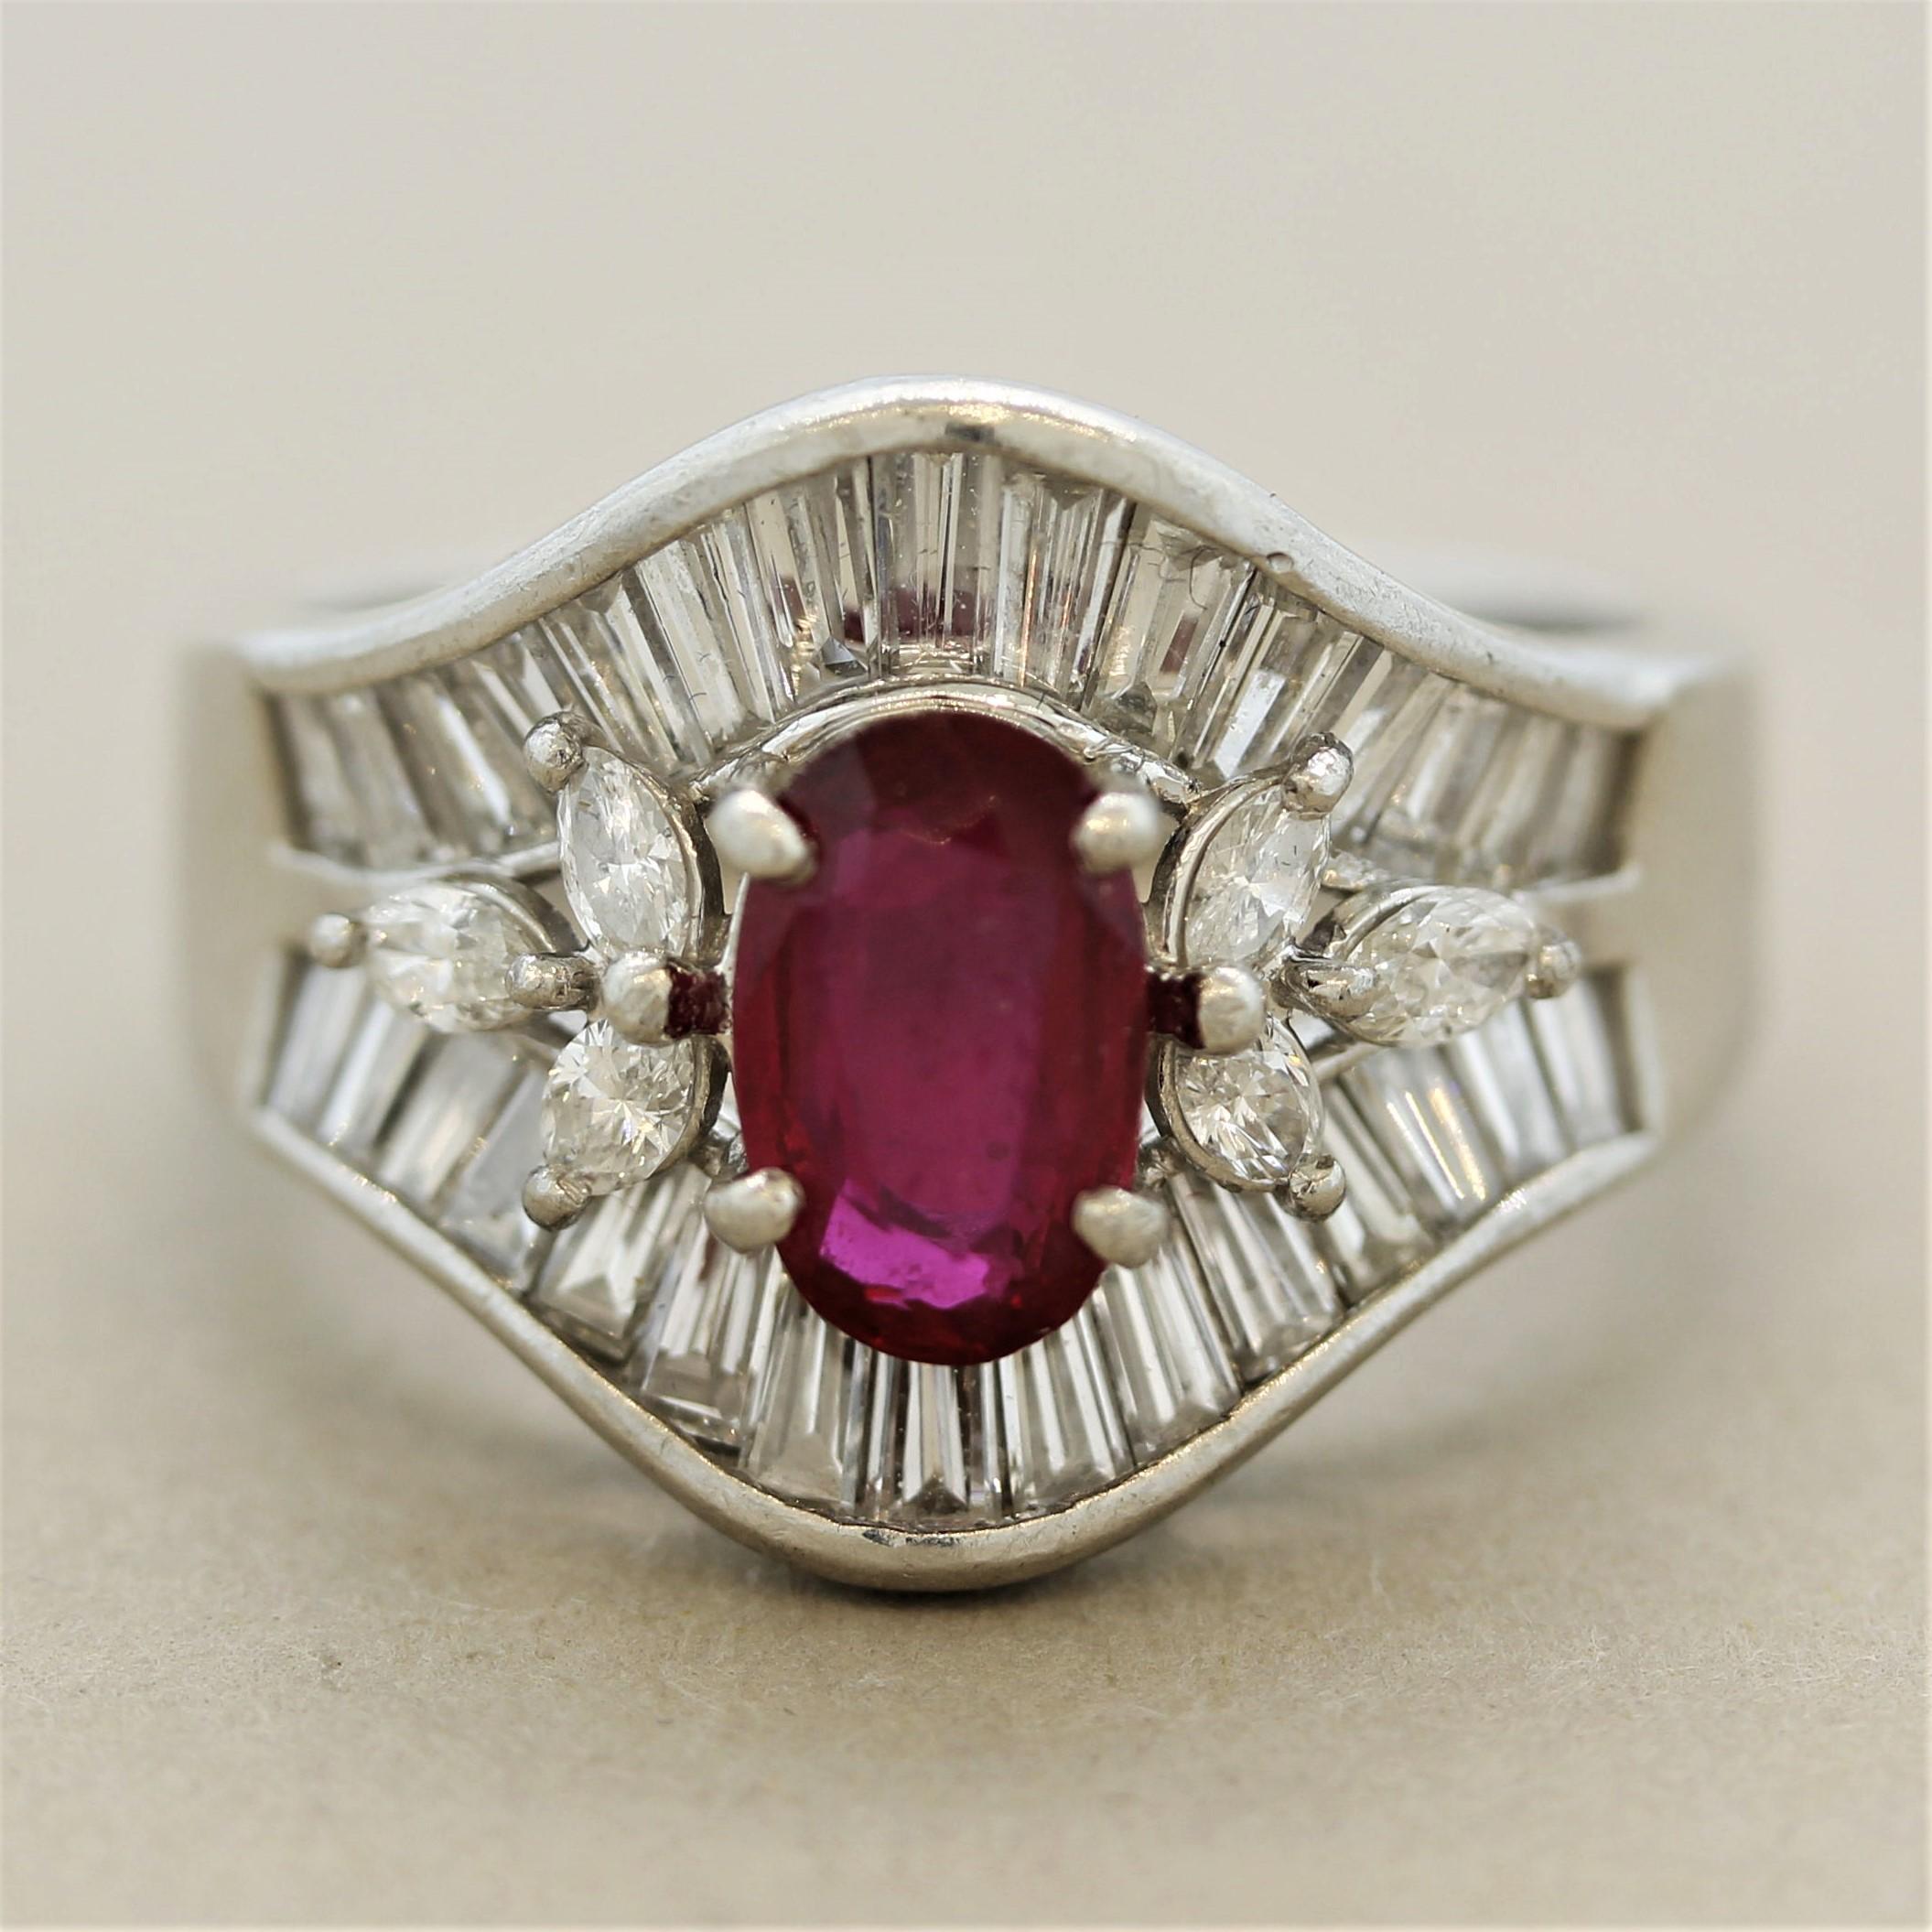 A fine ruby weighing 1.22 carats with a rich vivid red color takes center stage. It is complemented by 1.50 carats of diamonds, 6 marquise-shaped set on the ruby’s sides and baguette-cuts channel set above and below. Hand-fabricated in platinum, a